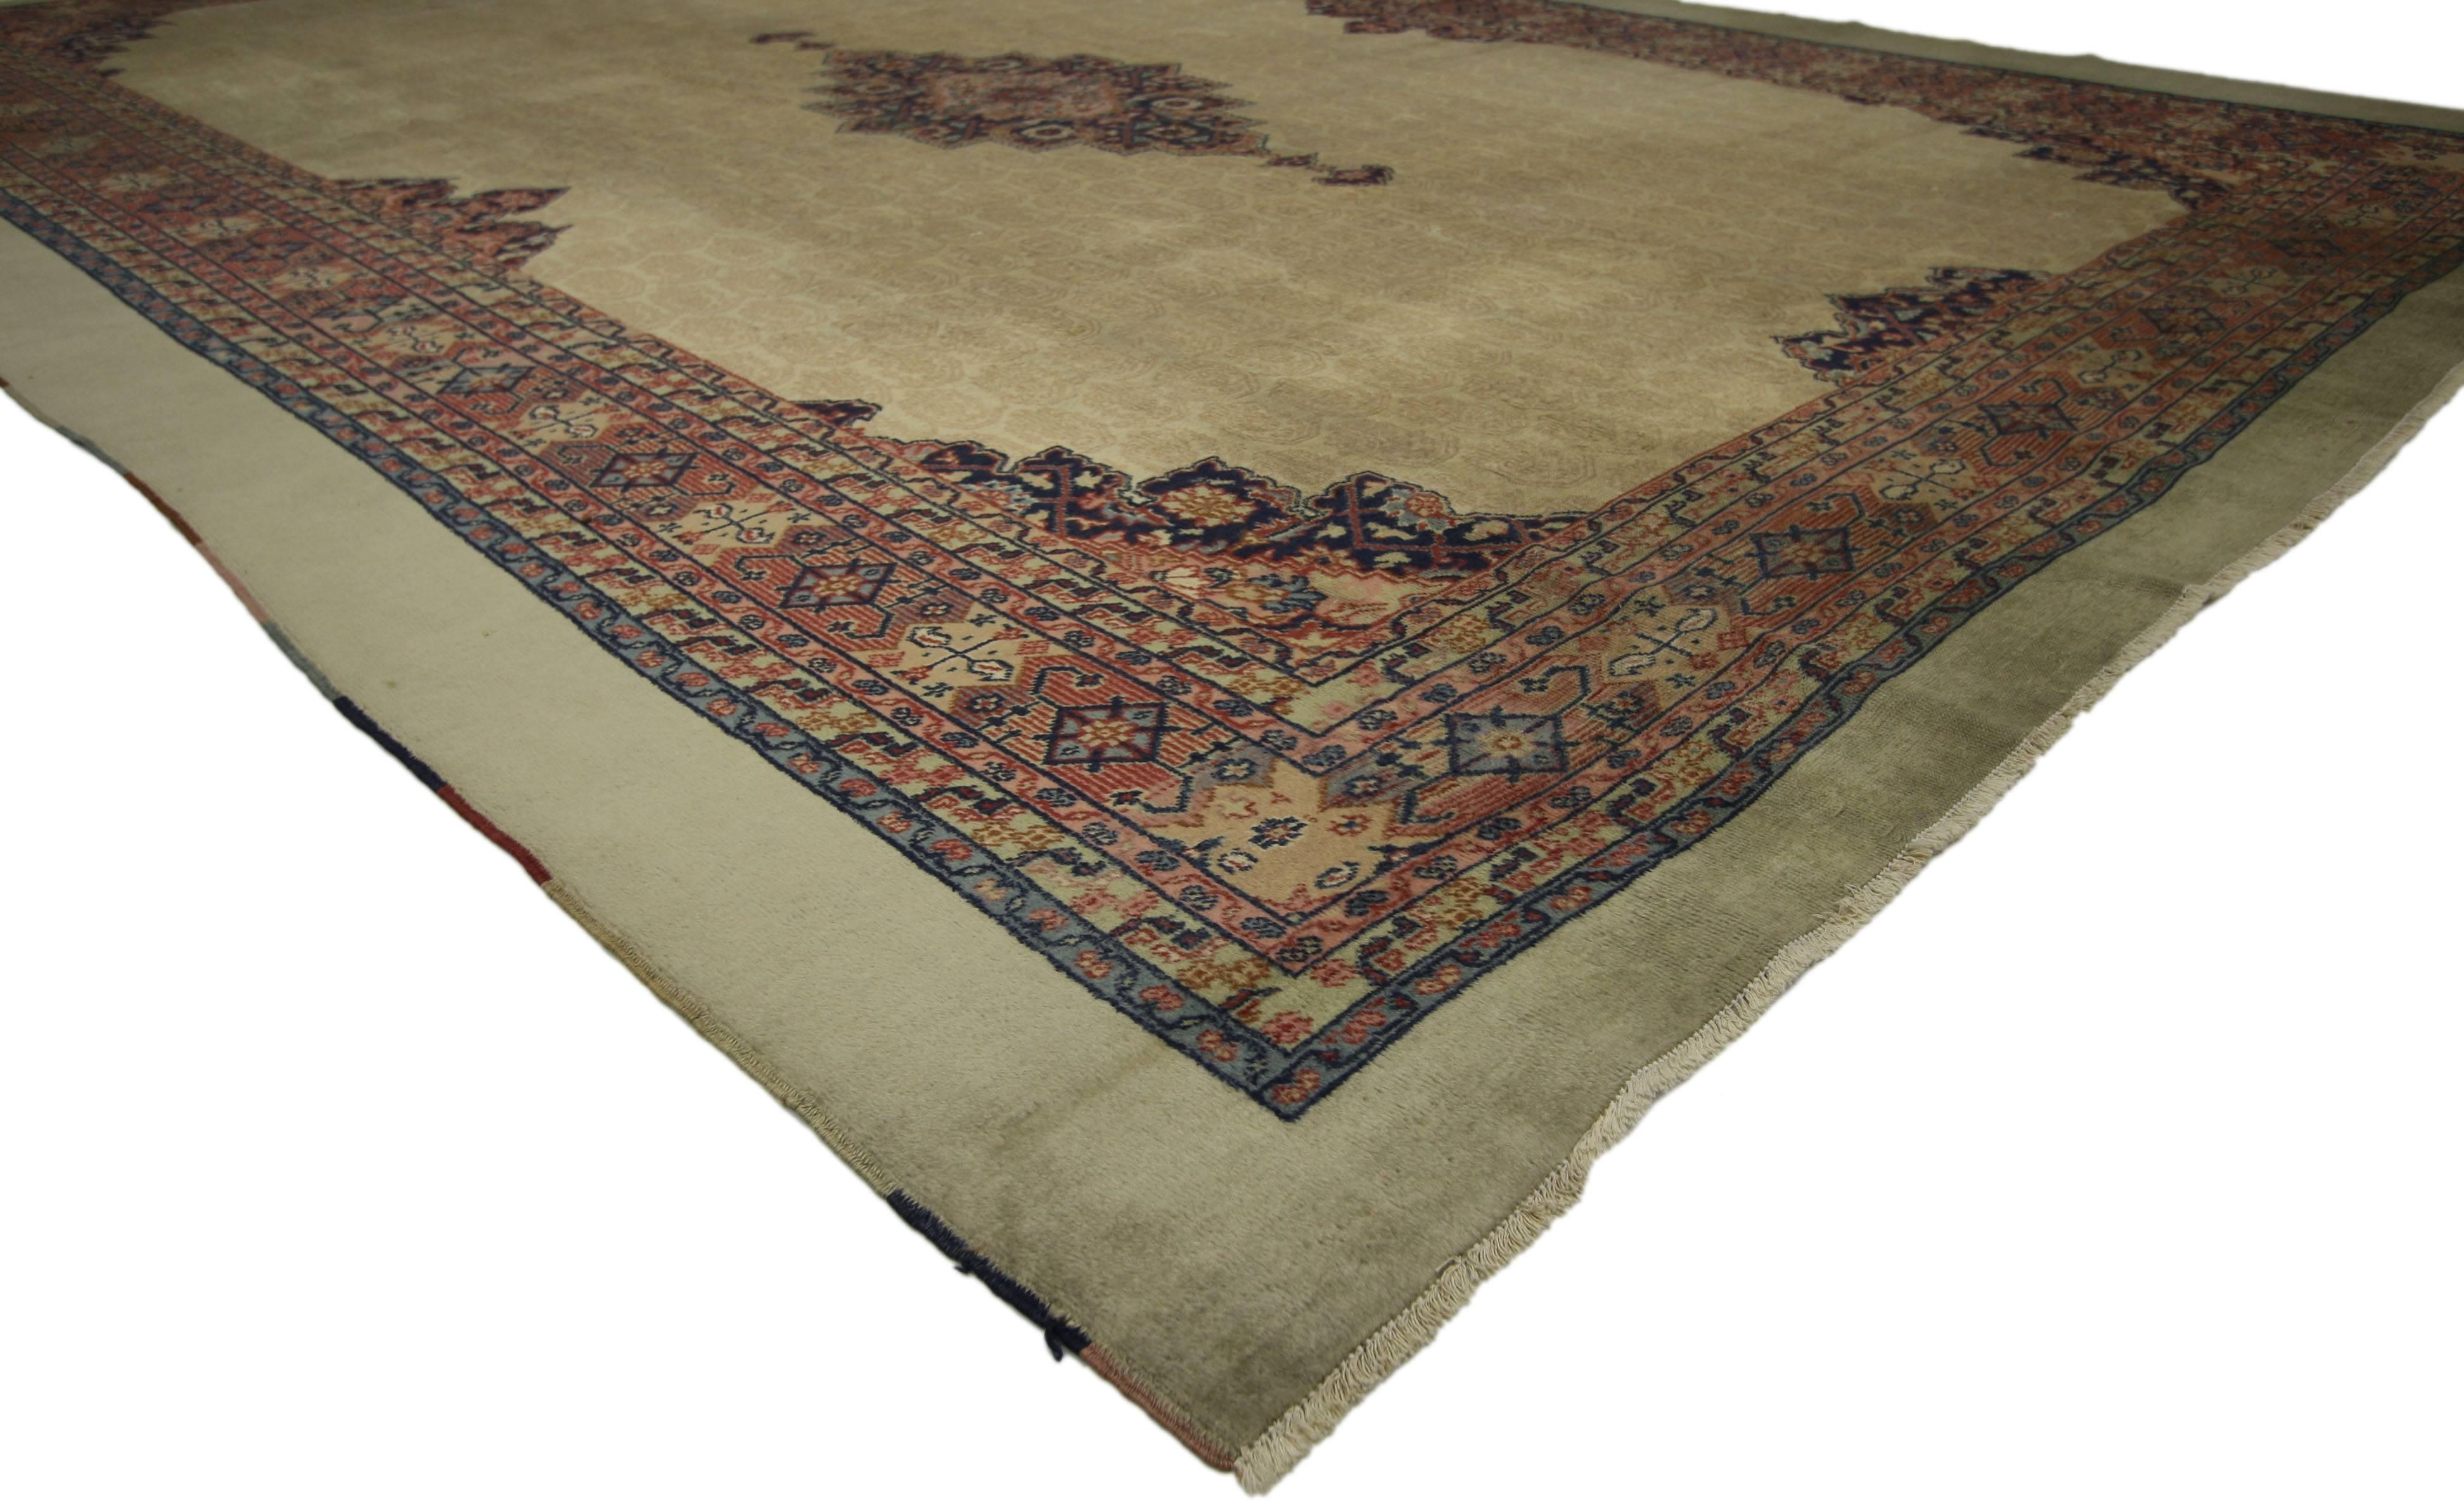 72224, distressed antique Turkish Sivas rug with rustic Feminine industrial style. This hand knotted wool distressed antique Turkish Sivas rug features a centre medallion with anchor pendants on either side. The medallion floats in an abrashed field